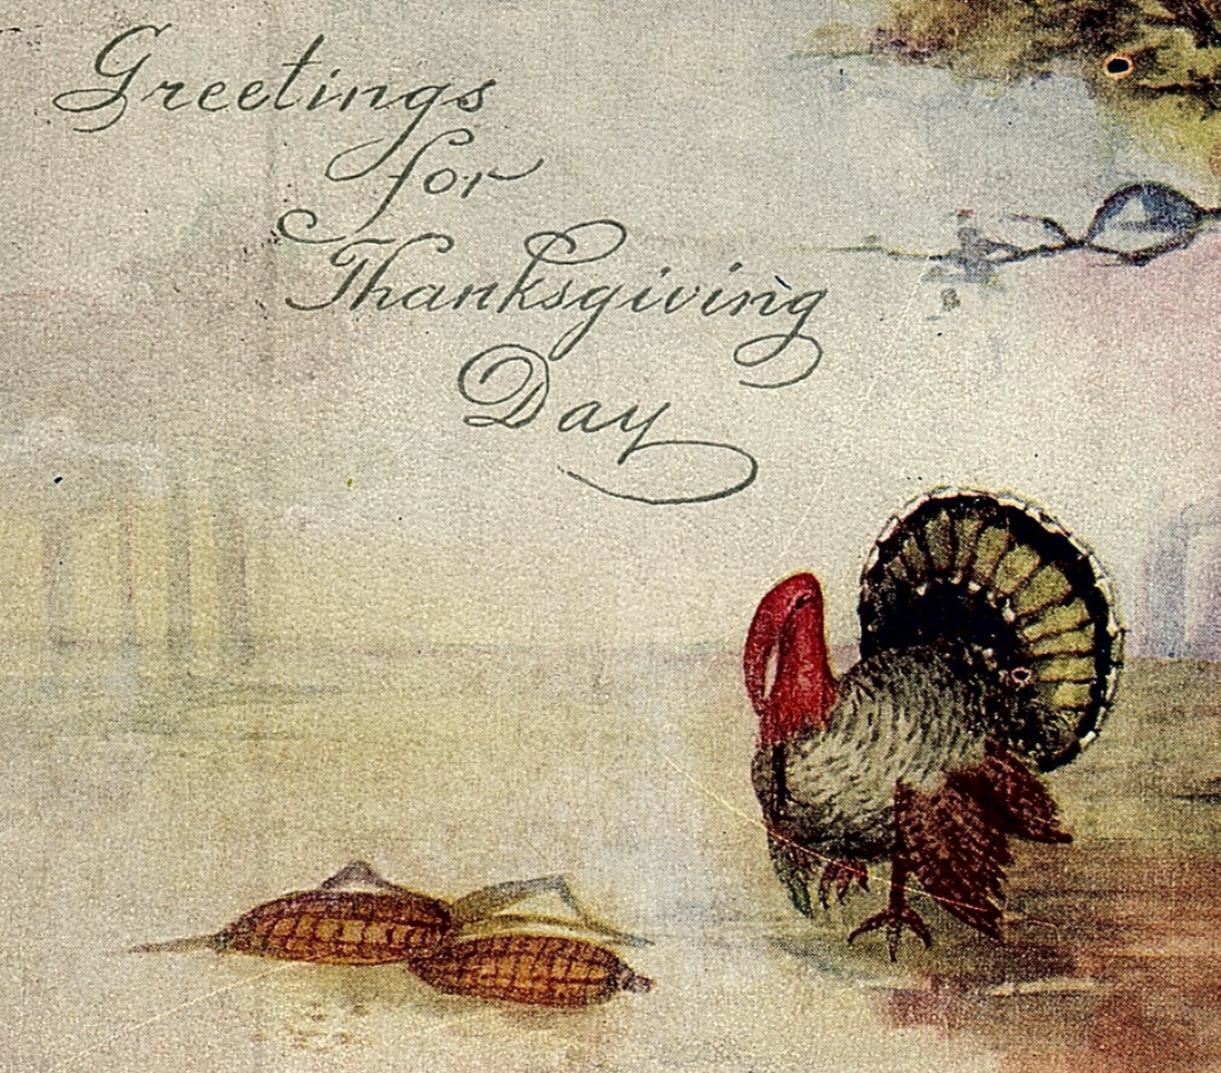 1920 GREETINGS FOR THANKSGIVING DAY TURKEY CORN FOREST POSTCARD 34-64